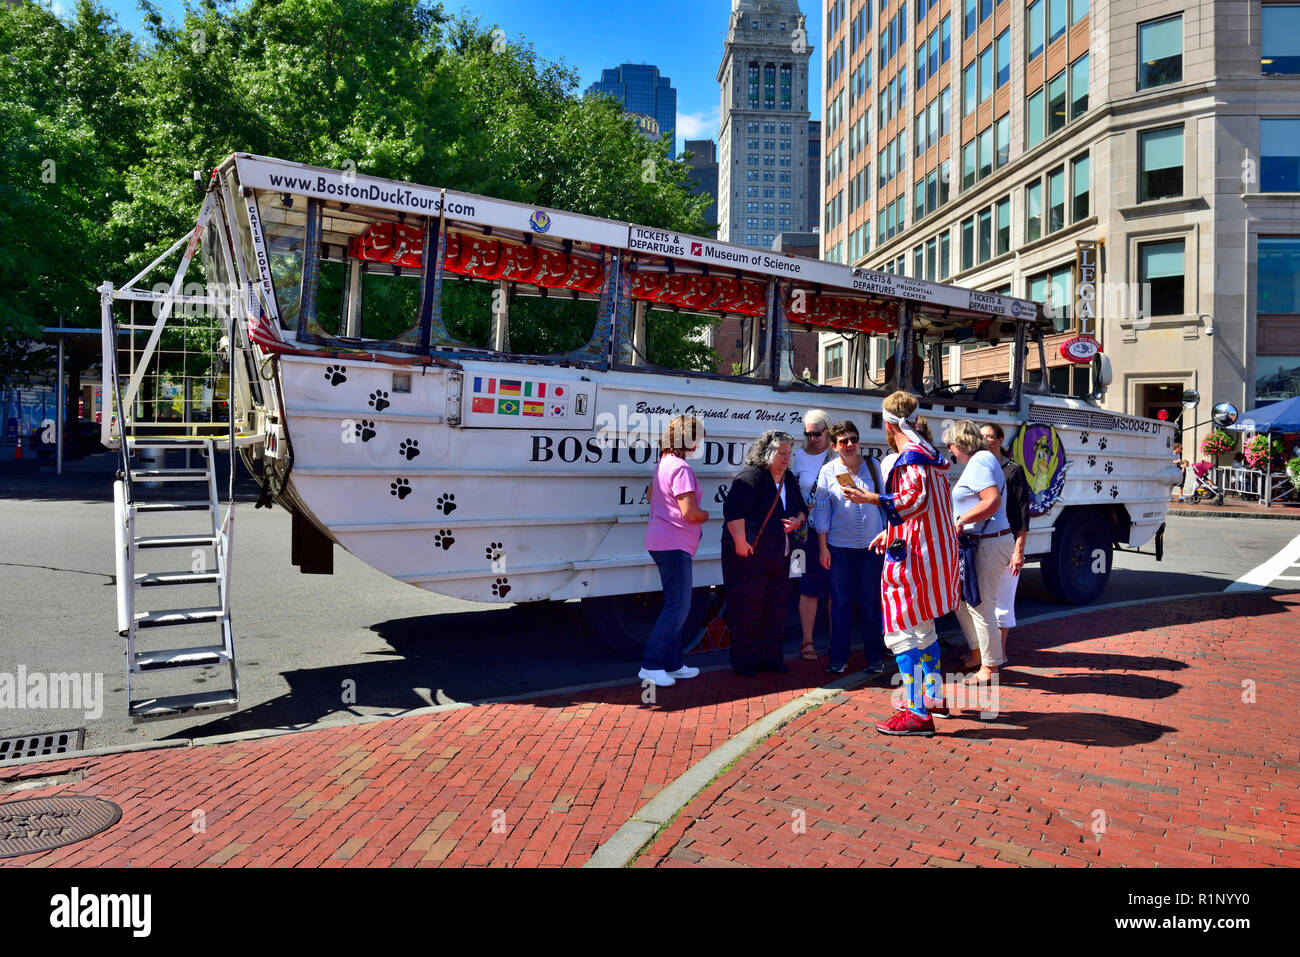 Boston land and harbor tour on duck boat with leader briefing visitors, Massachusetts, USA, Stock Photo